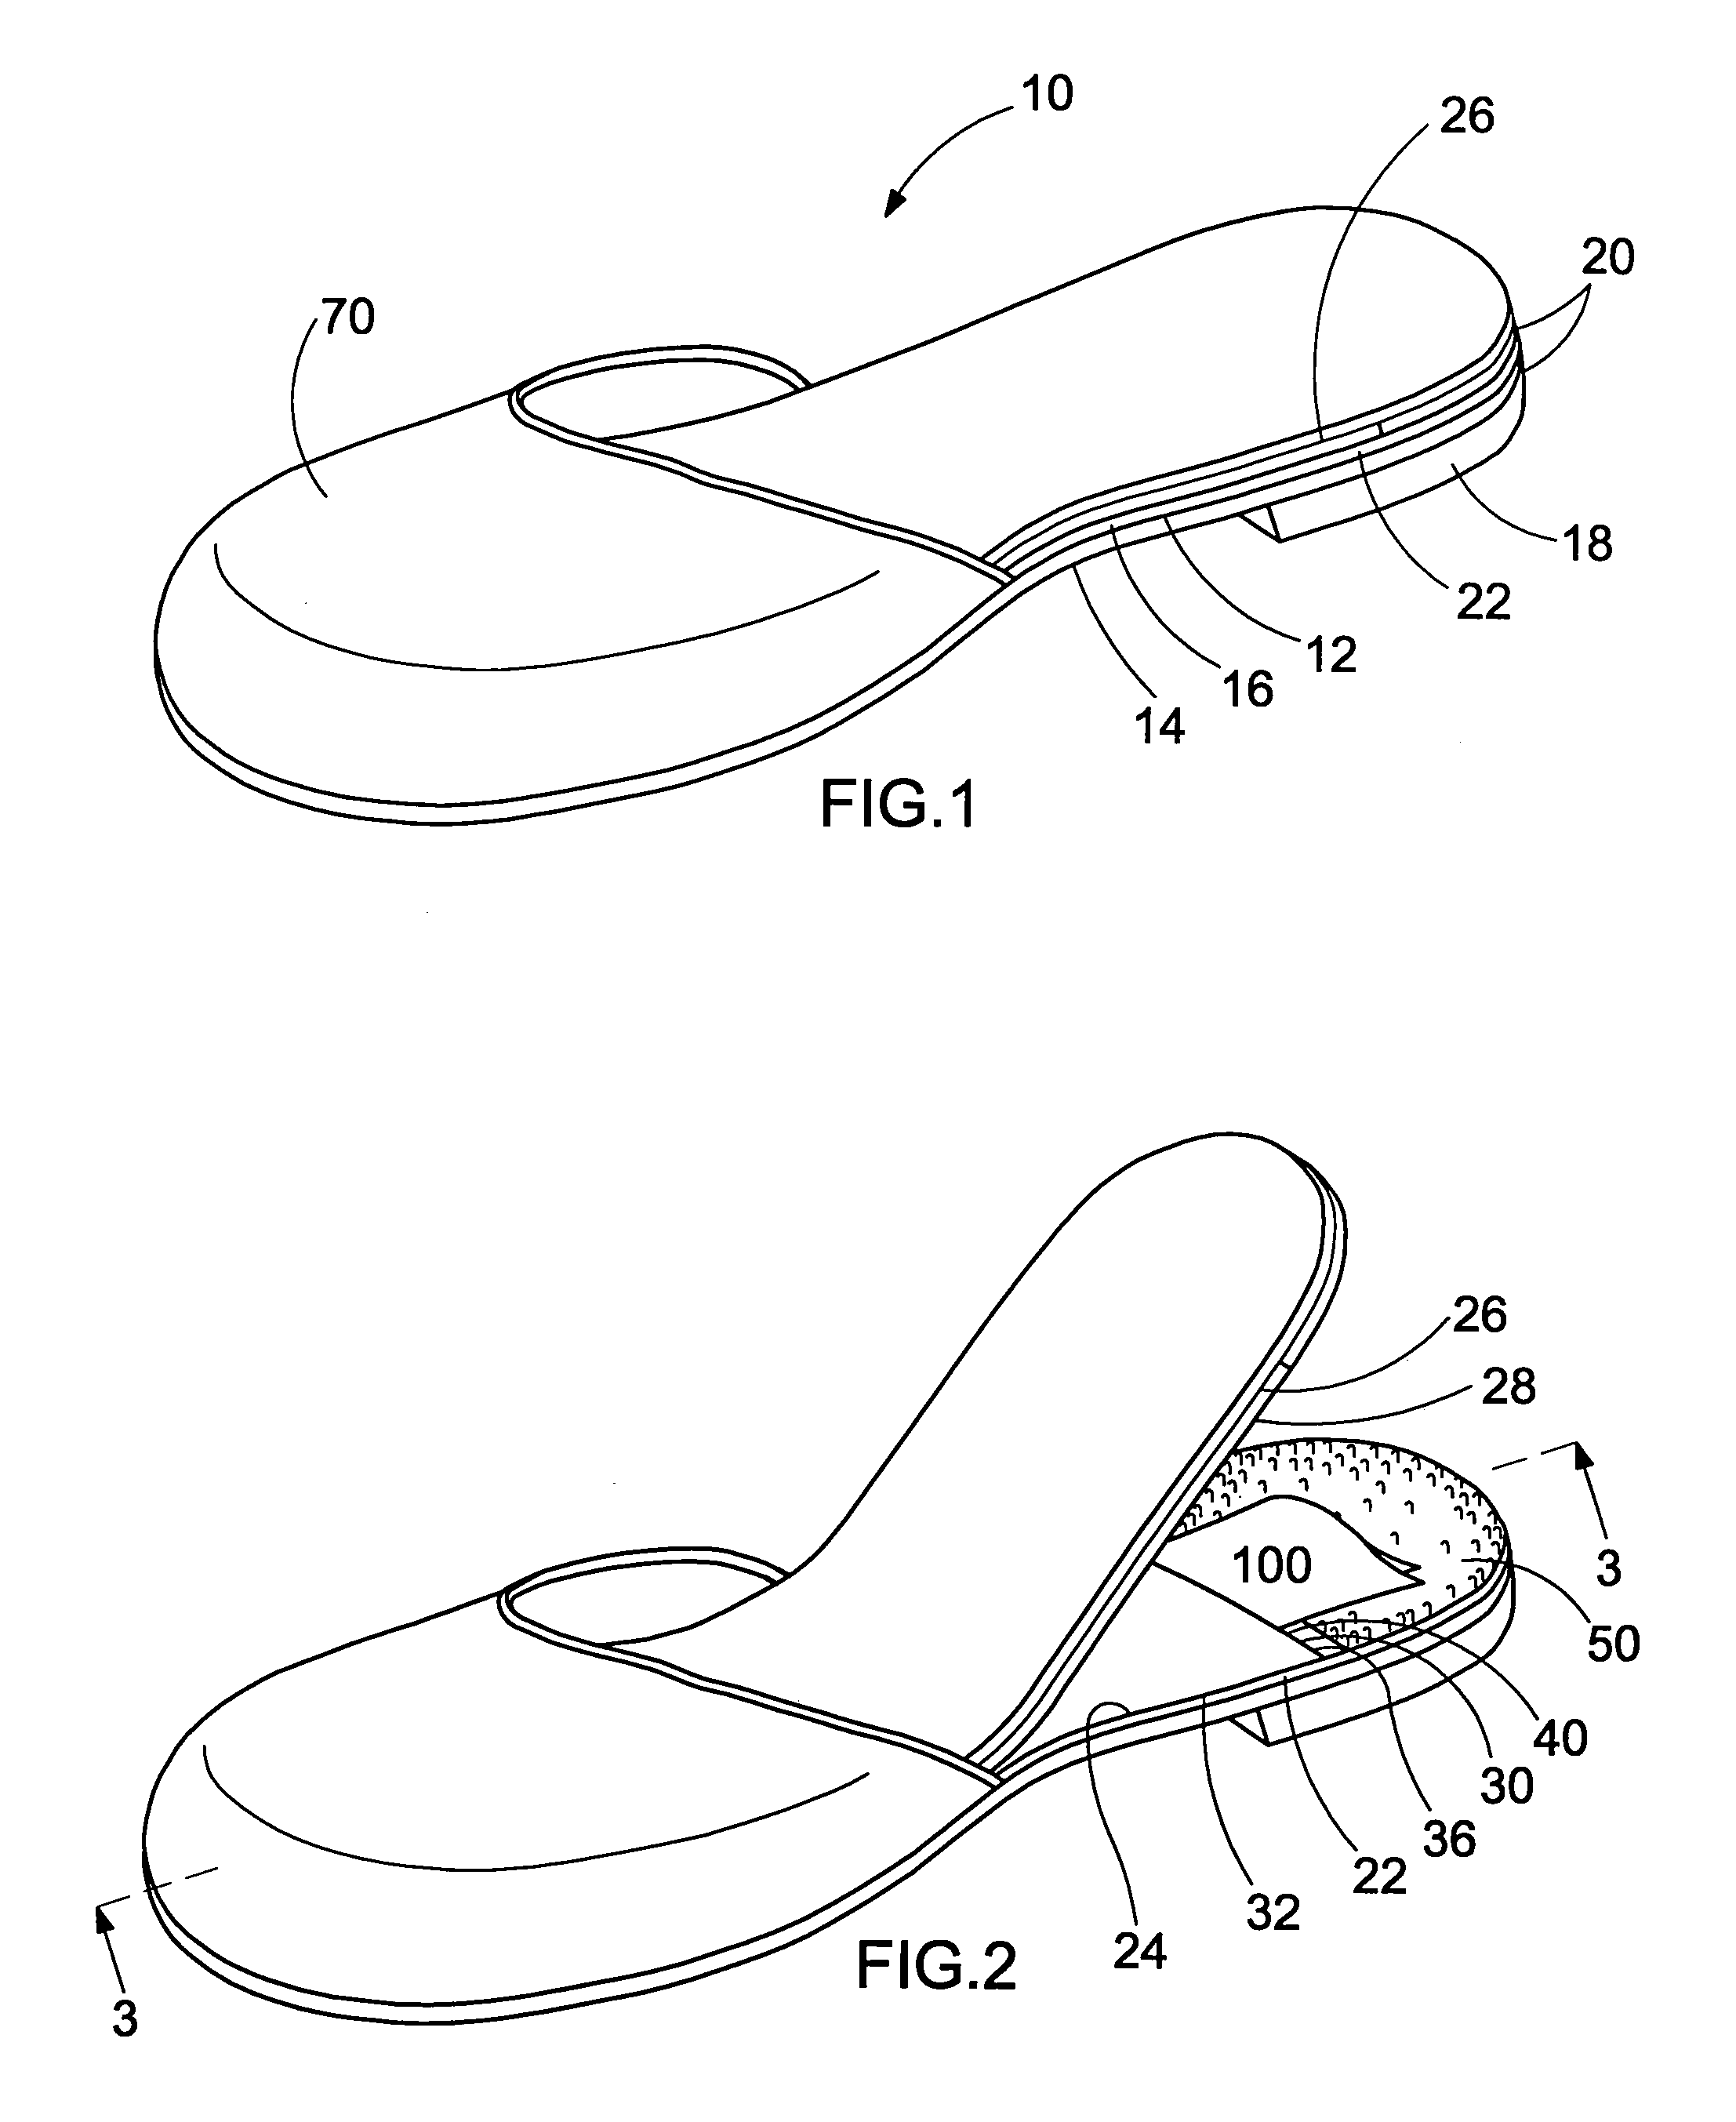 Shoe with concealed compartment for retaining items